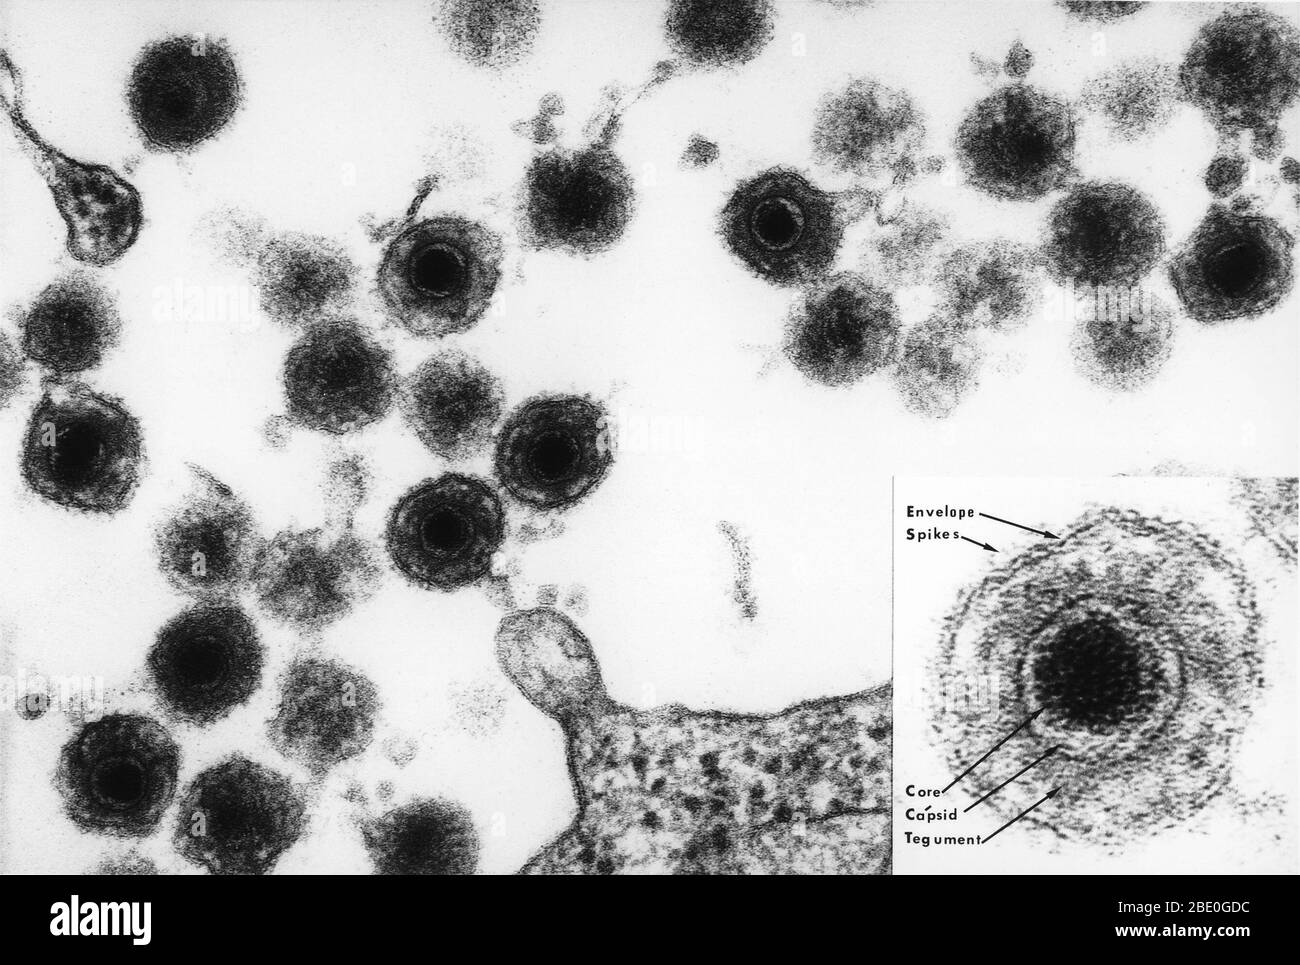 The photo of an electron micrograph of HHV-6 also includes a labeled insert of the mature virus particle. The HHV-6 is a double stranded DNA virus of the herpes family. The virus particles shown here have matured and are then released from the lymphocyte which has been infected. The 'owl's eye' appearance of the virus particles is characteristic of the herpes family. The HHV-6, or the human herpes virus-6, was thought to infect b-cells and was at one time called HBLV, human b-lymphotropic virus. It is now known to infect t-cells and is the cause of the childhood rash 'roseola' and some cases o Stock Photo